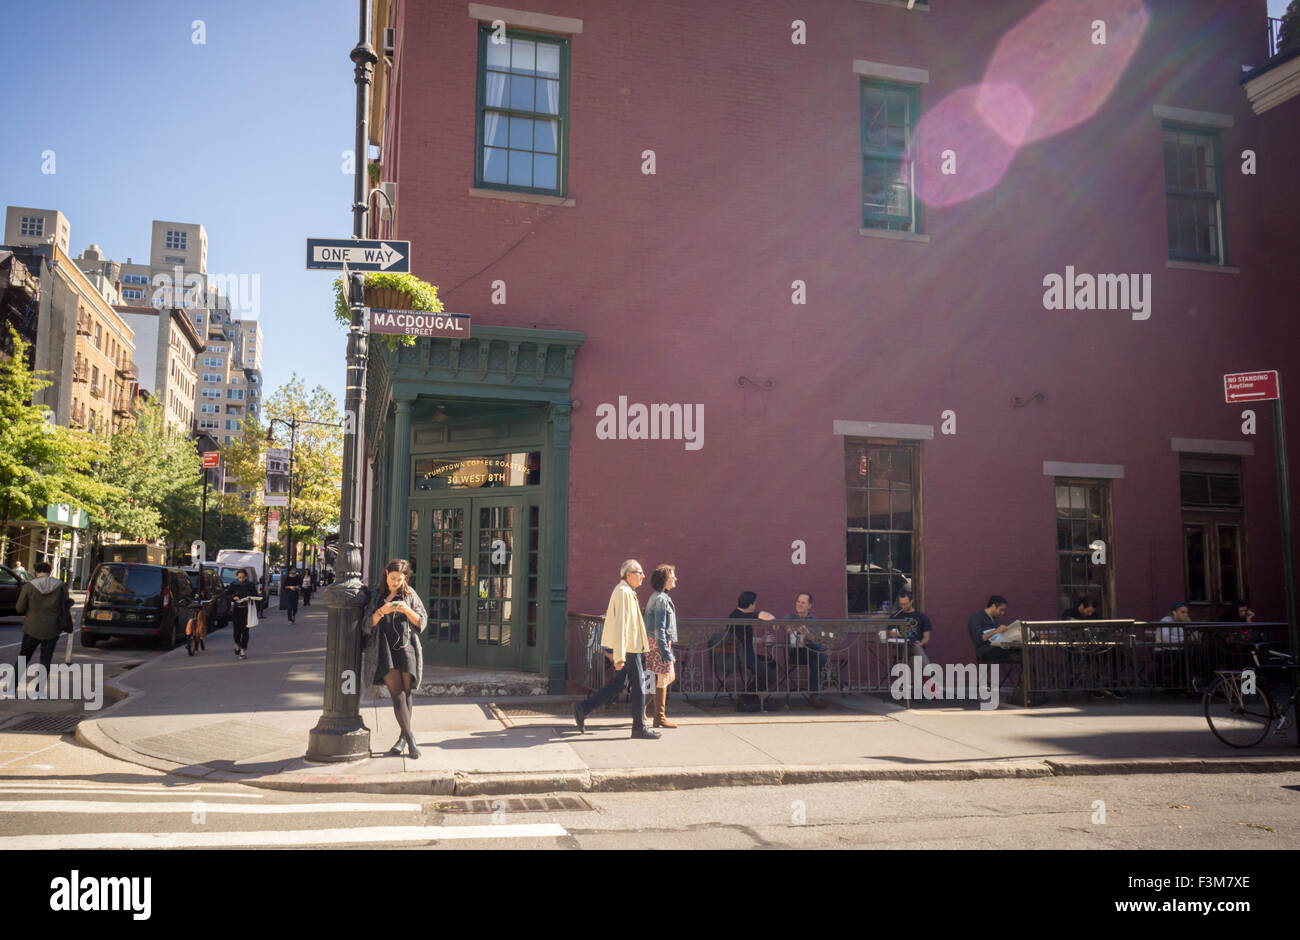 A branch of Stumptown Coffee Roasters in Greenwich Village in New York on Wednesday, October 7, 2015. Peet's Coffee & Tea has bought Stumptown Coffee Roasters for an undisclosed sum. Stumptown has a cult-like following and the two brands are expected to operate independently. (© Richard B. Levine) Stock Photo